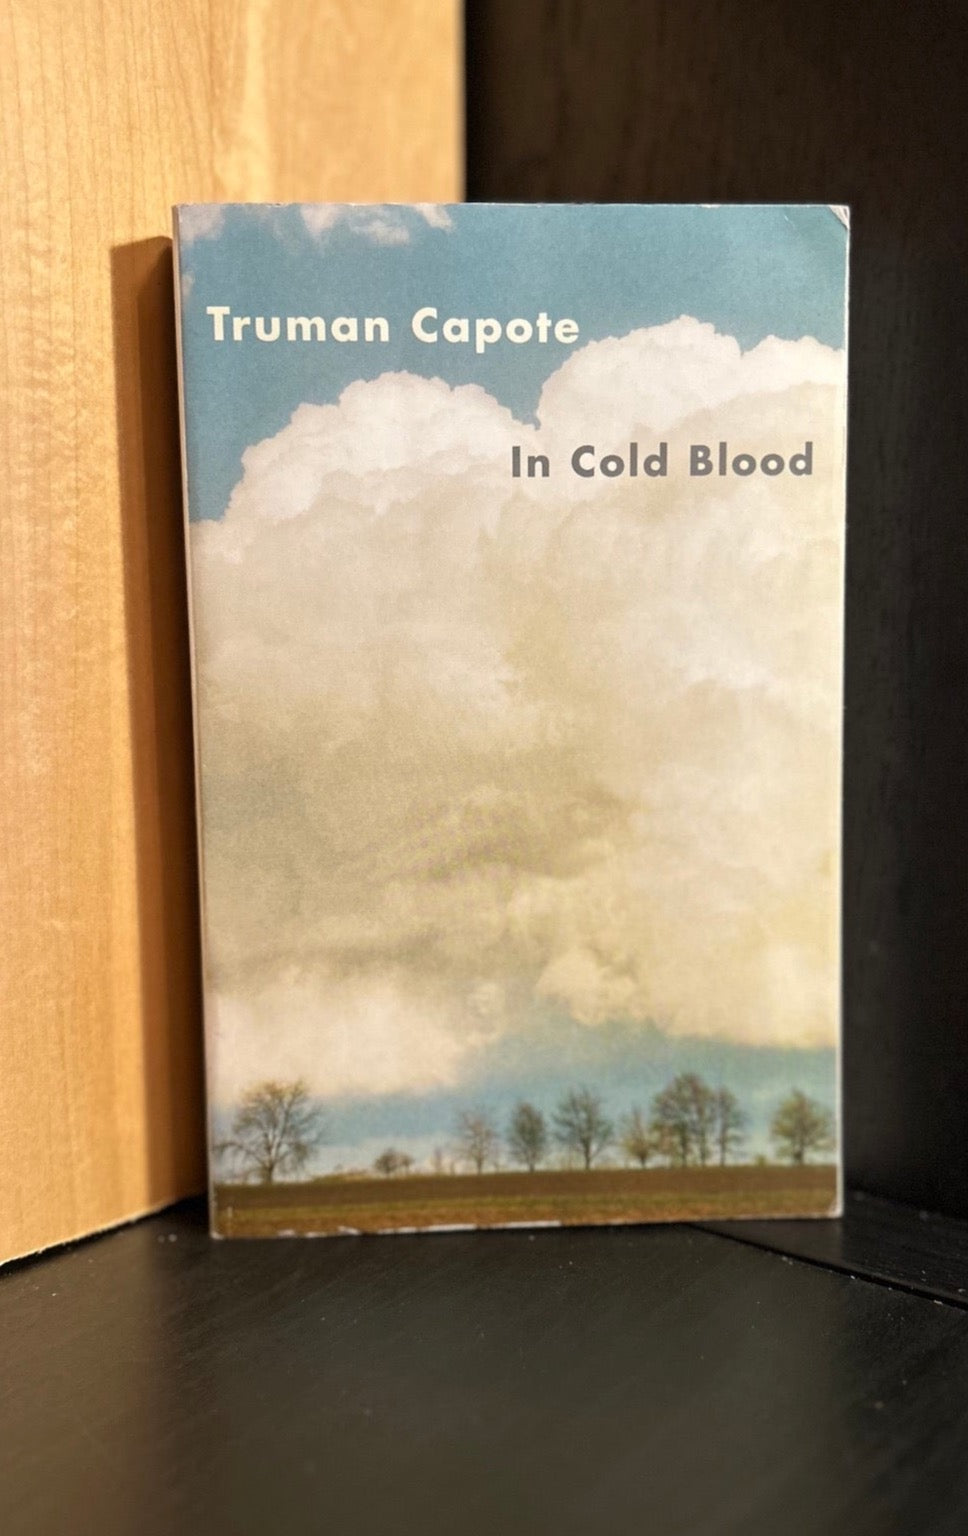 In Cold Blood - Truman Capote - 2012